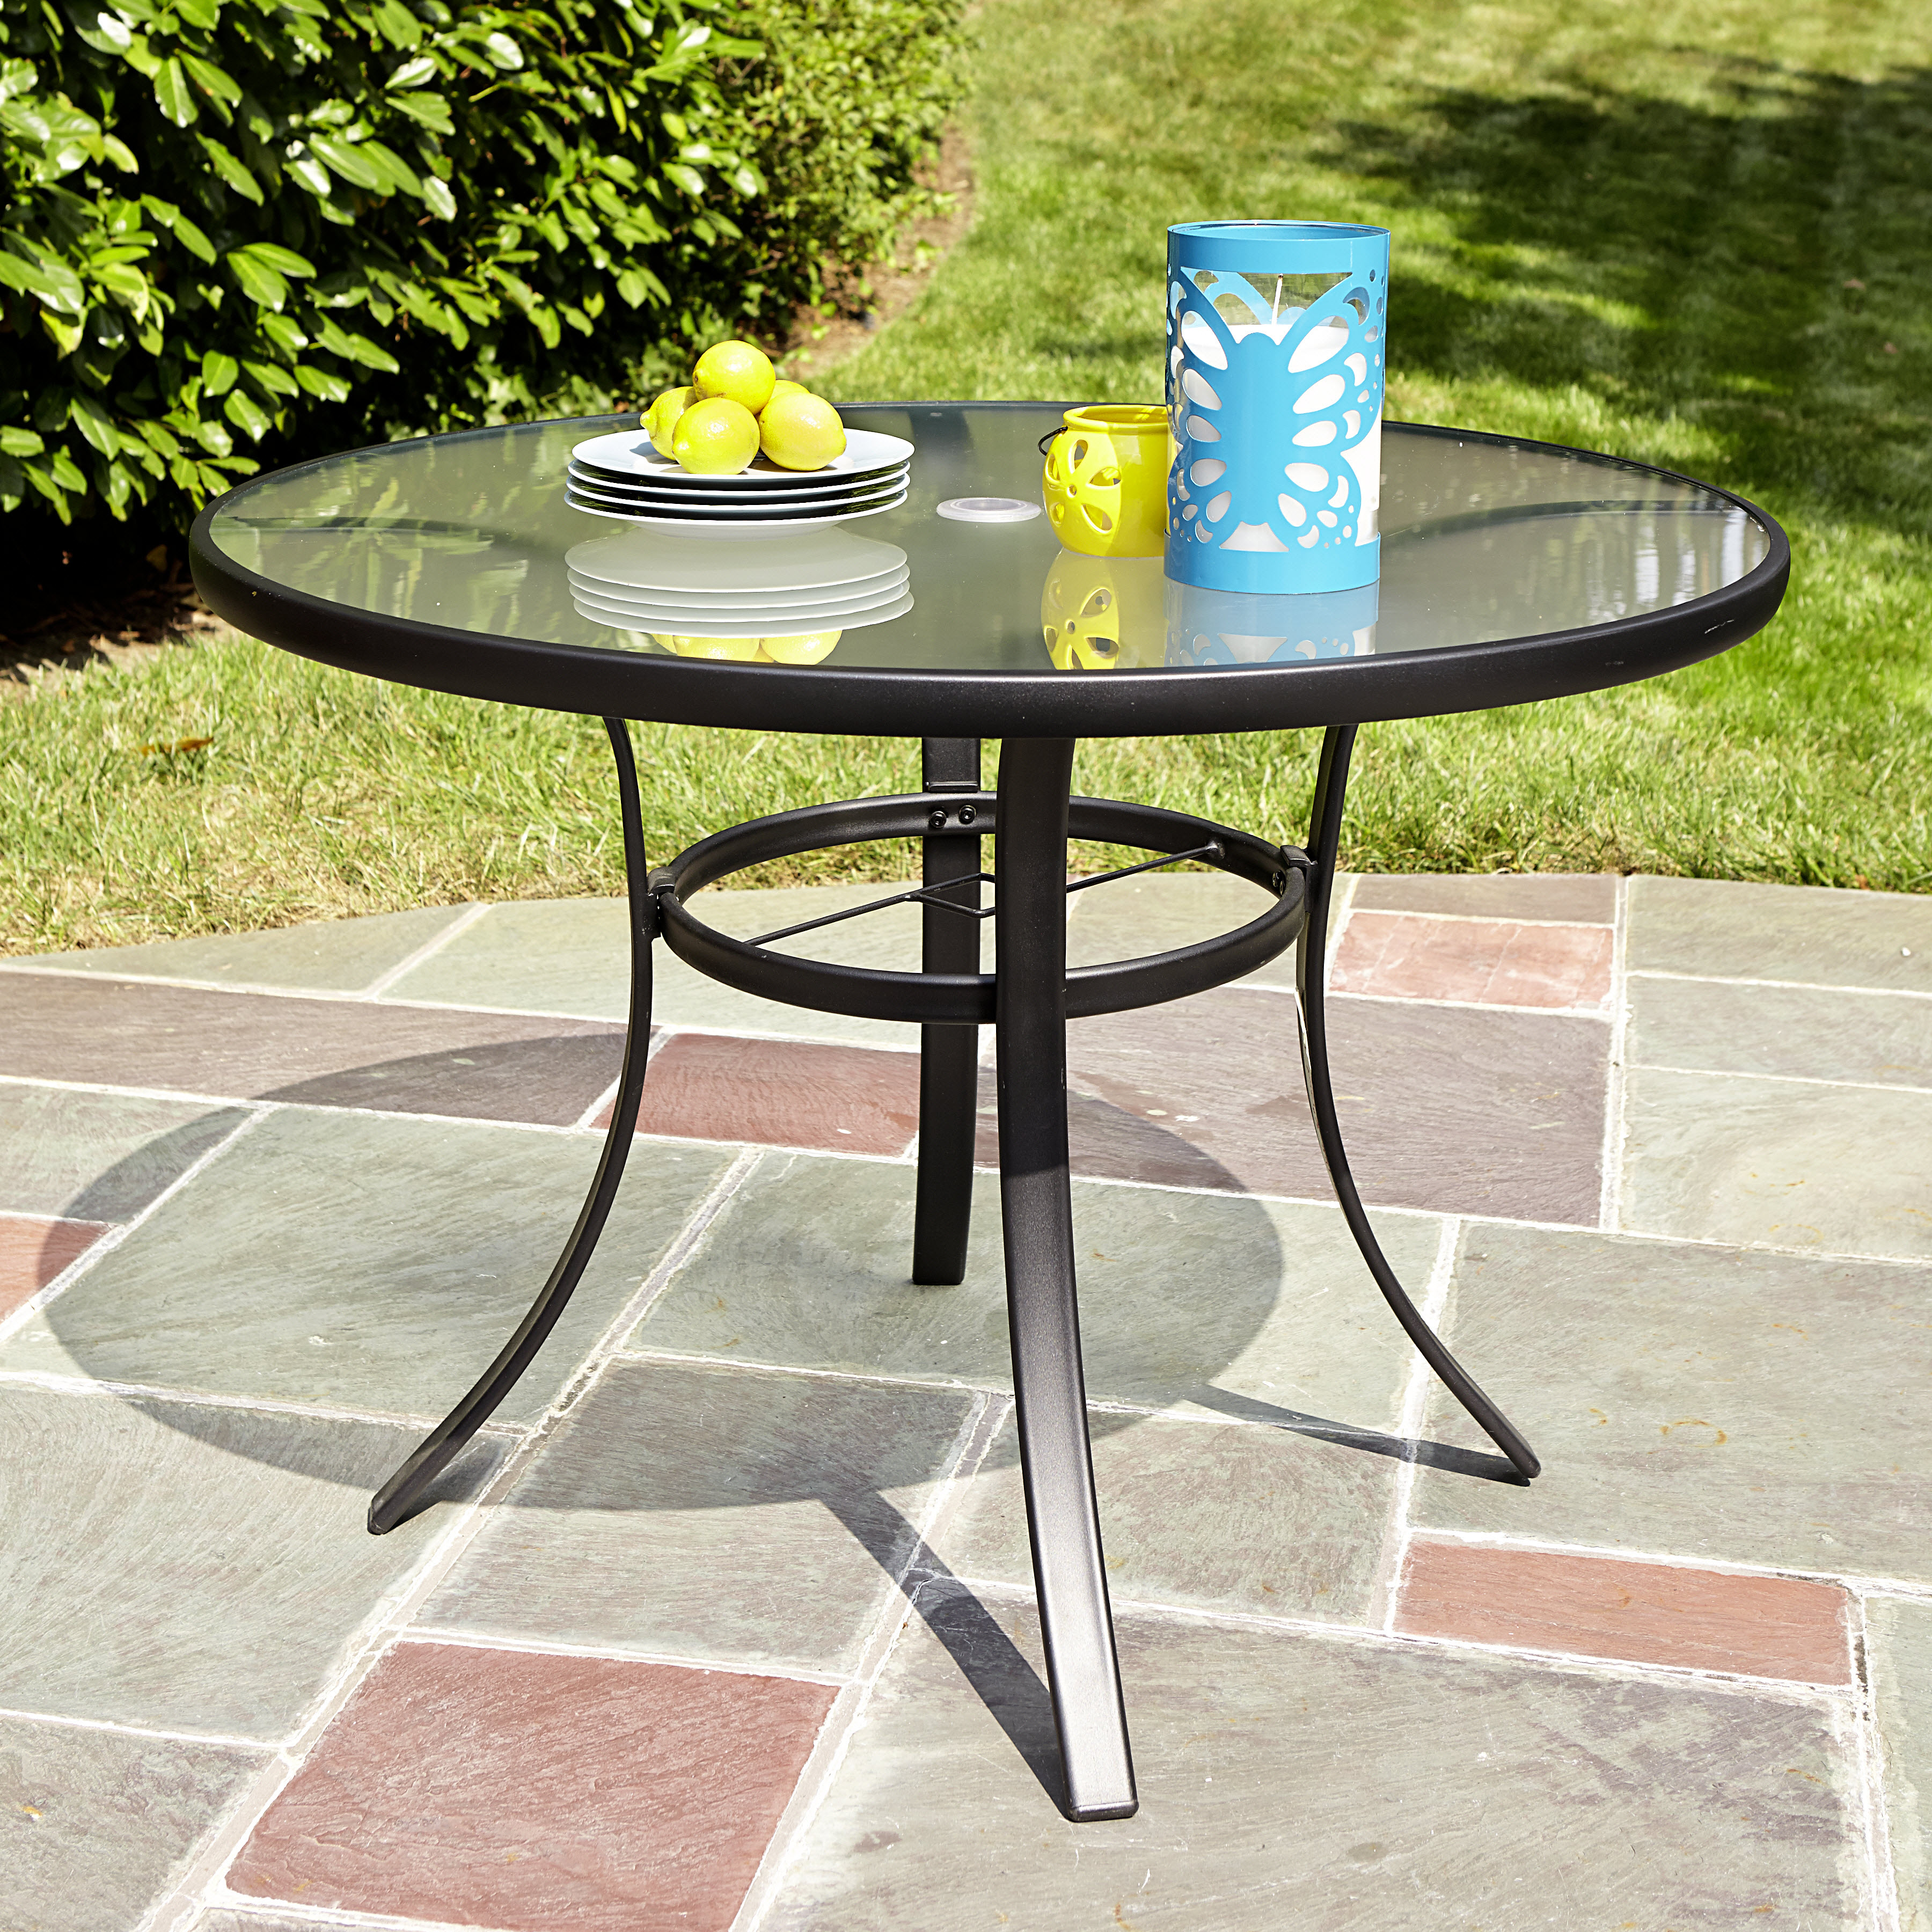 garden tables essential garden bartlett tempered glass dining table *limited availability QFQCNVO